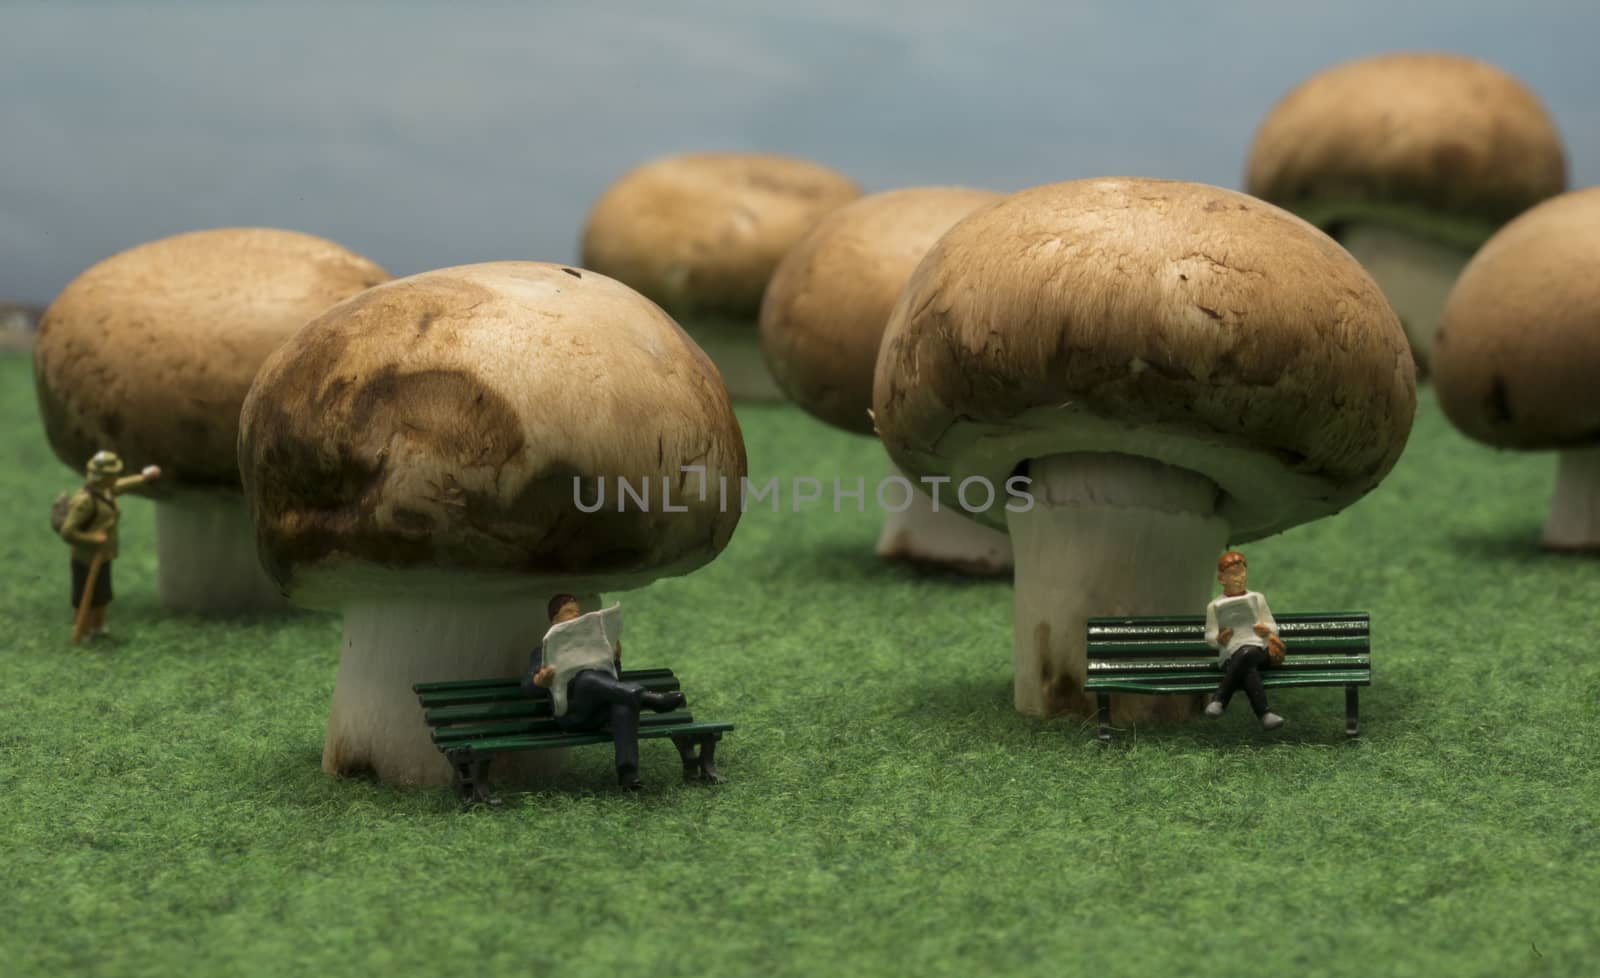 little people puppets sit on mushrooms in forest made from mushrooms